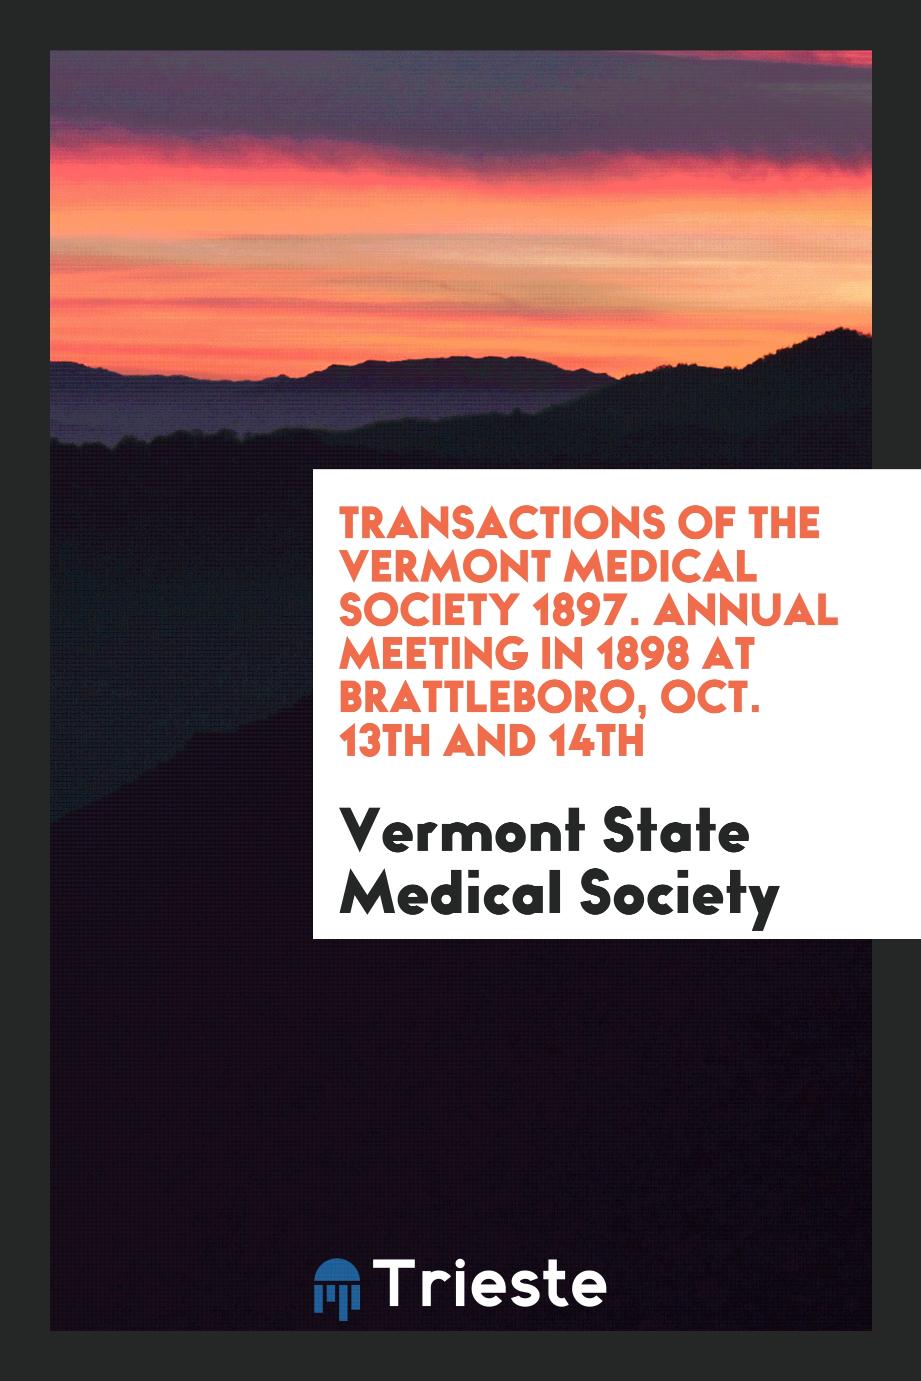 Transactions of the Vermont Medical Society 1897. Annual Meeting in 1898 at Brattleboro, Oct. 13th and 14th